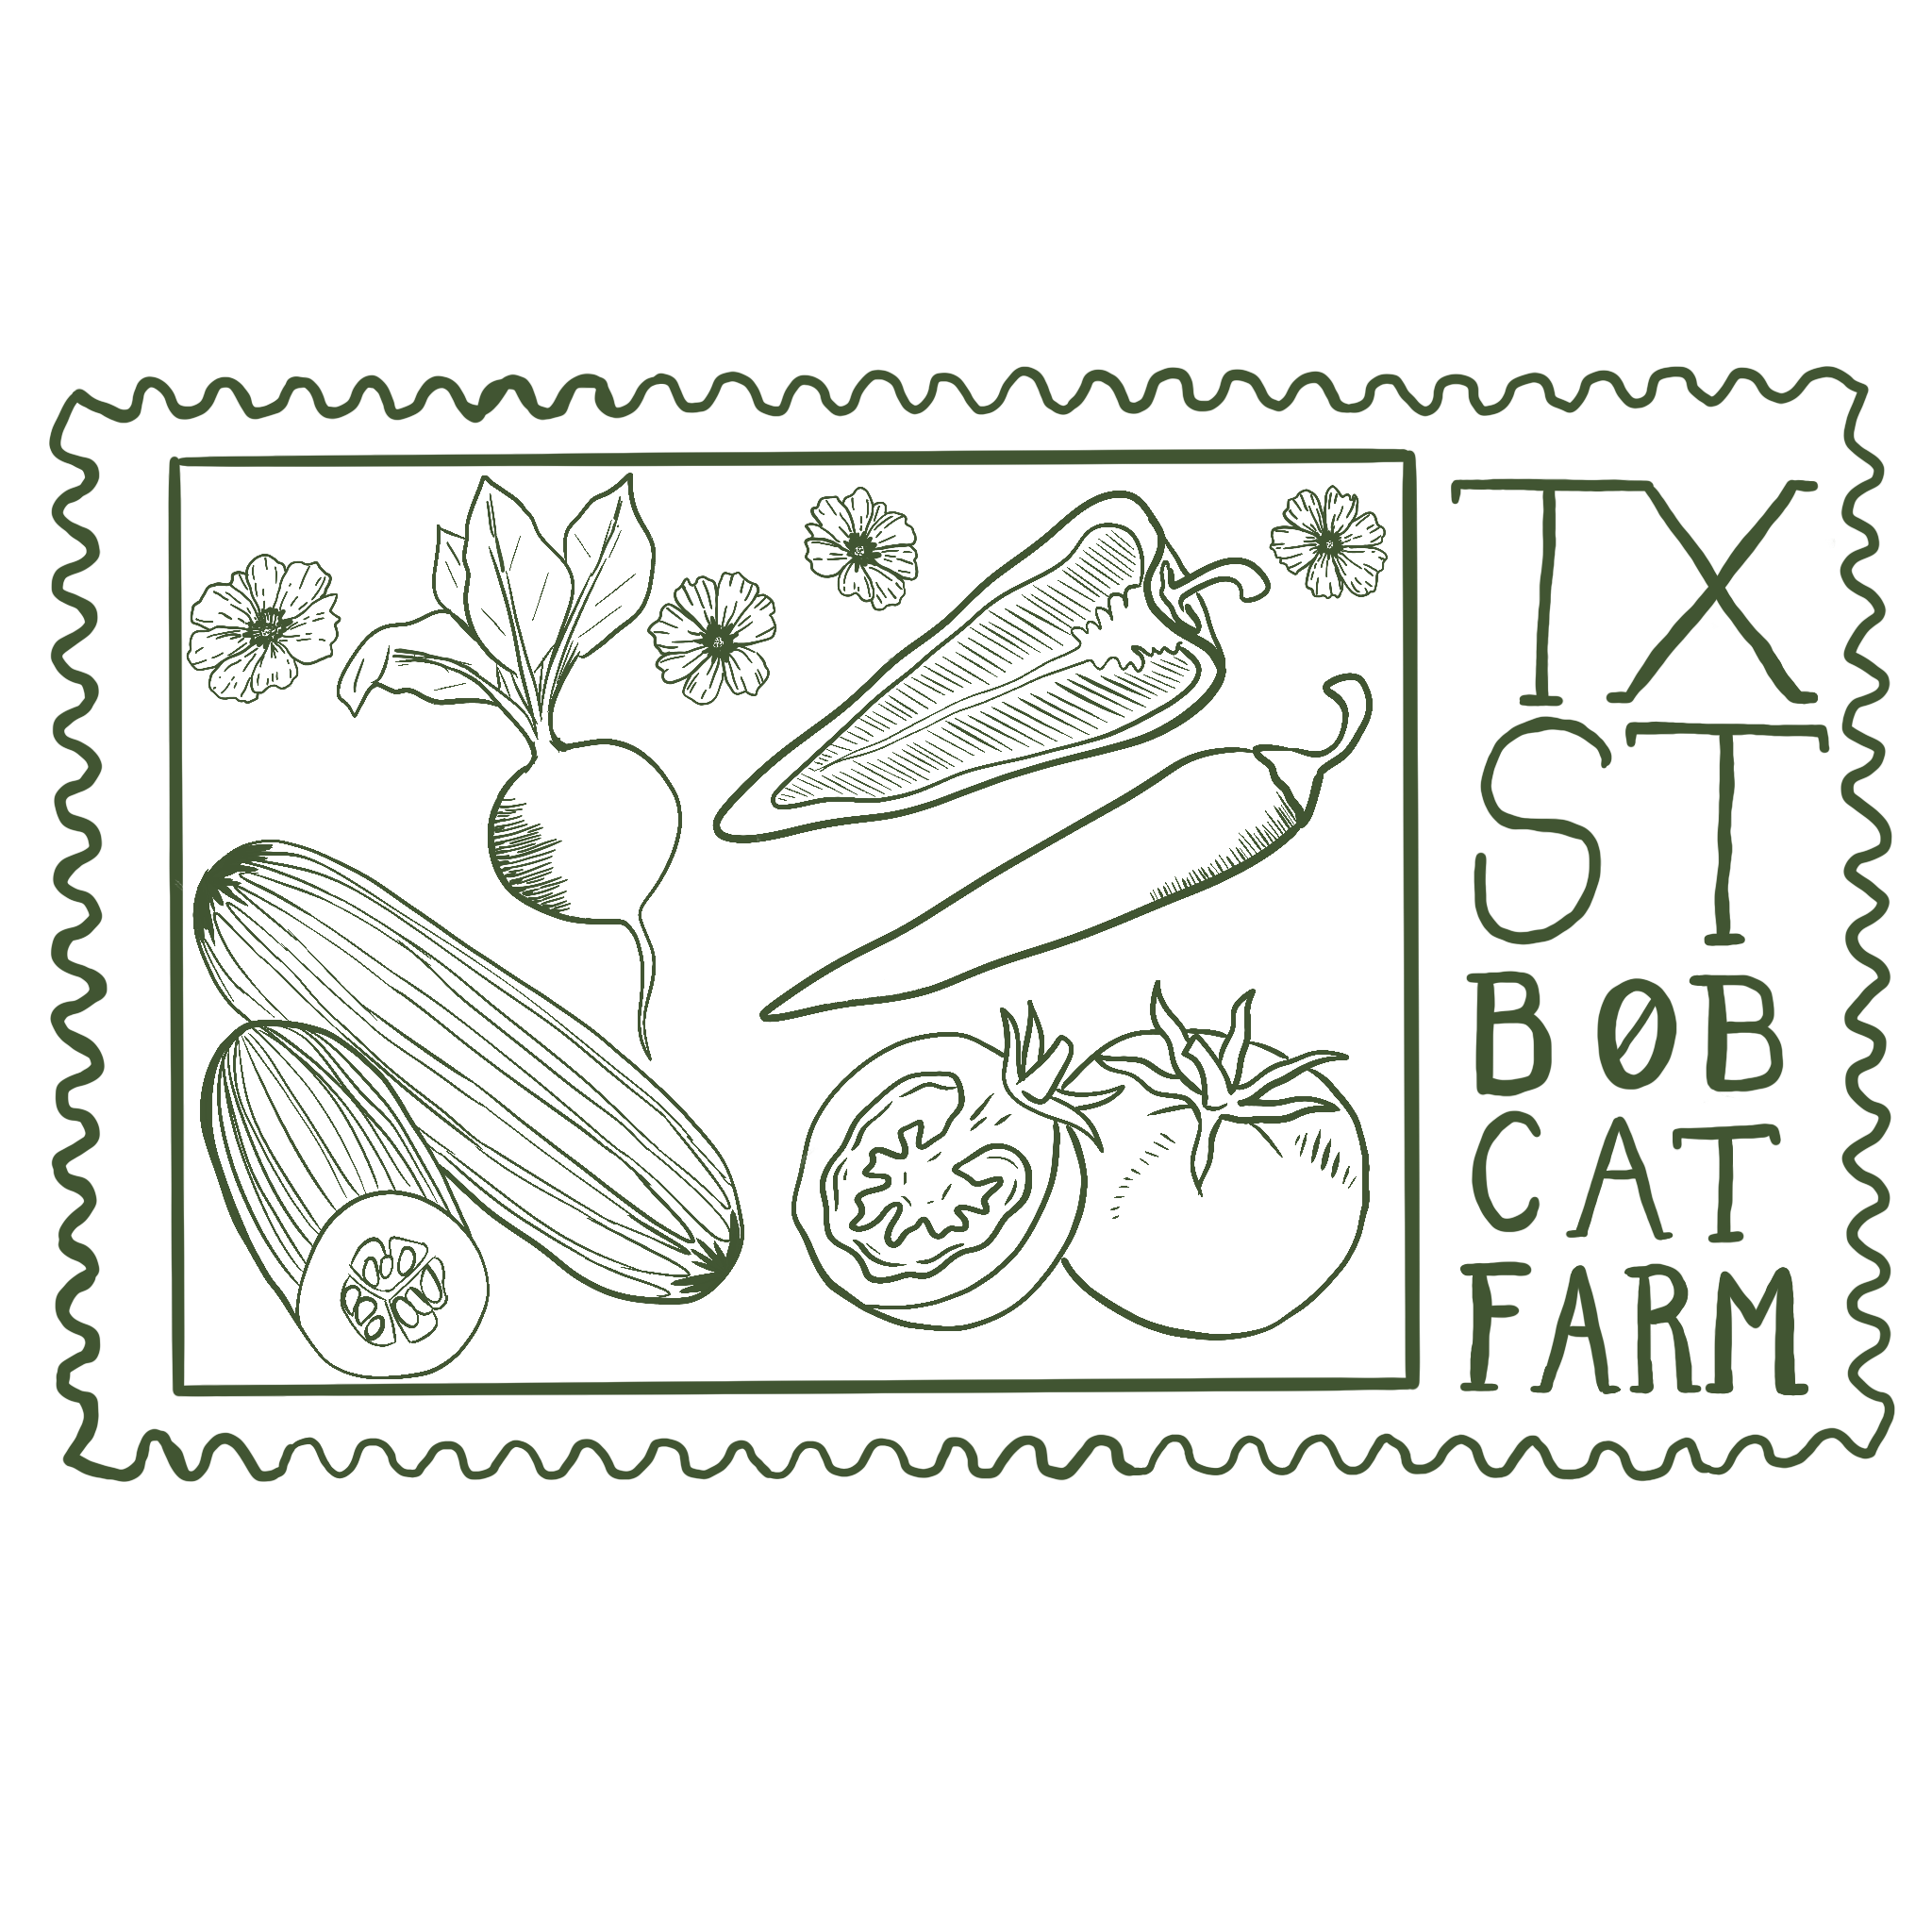 Alternate Bobcat Farm Design, Green. Forest green line-art postage stamp with drawn vegetables and flowers, and "TXST Bobcat Farm" on right side of the stamp design. 